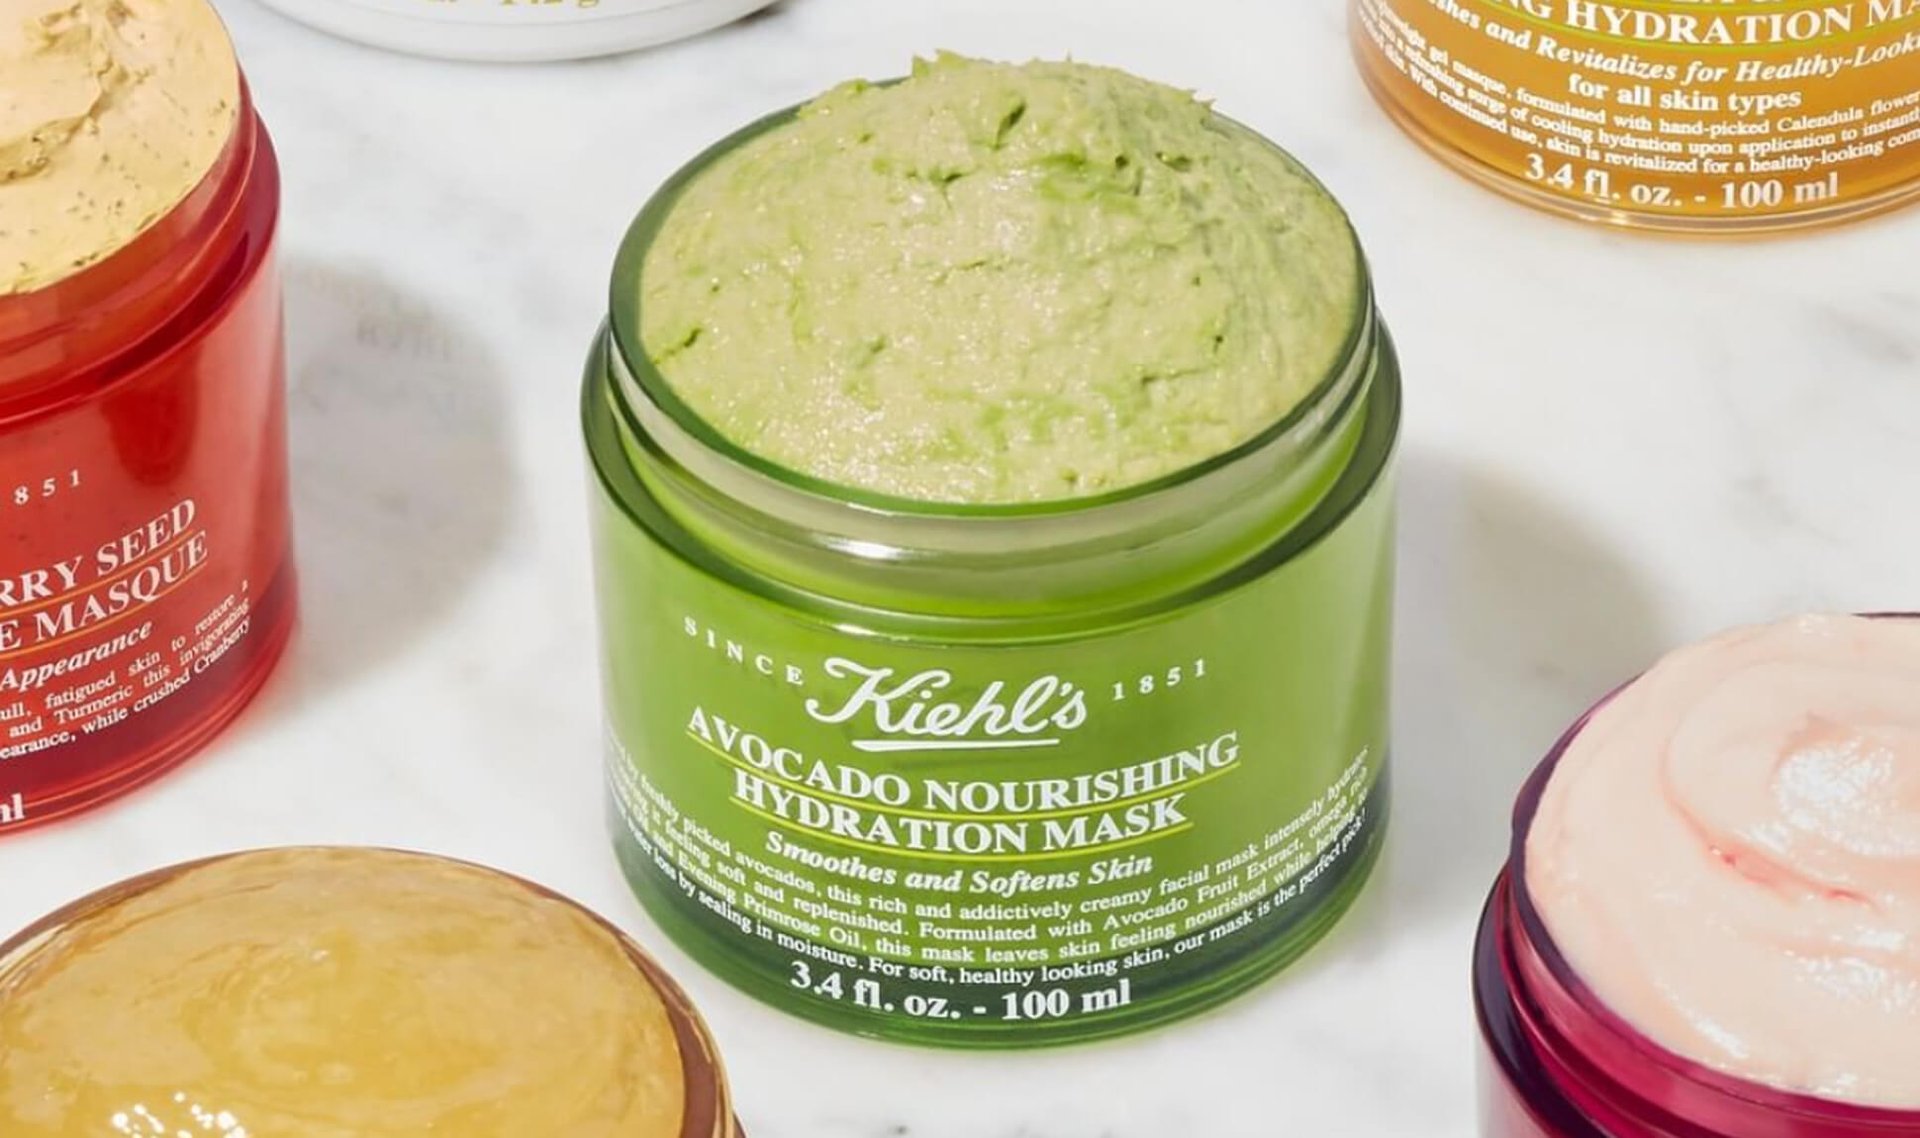 Get Ready for a Weekend of Self-Care With Kiehl’s Latest Mask Marvel Online Offer